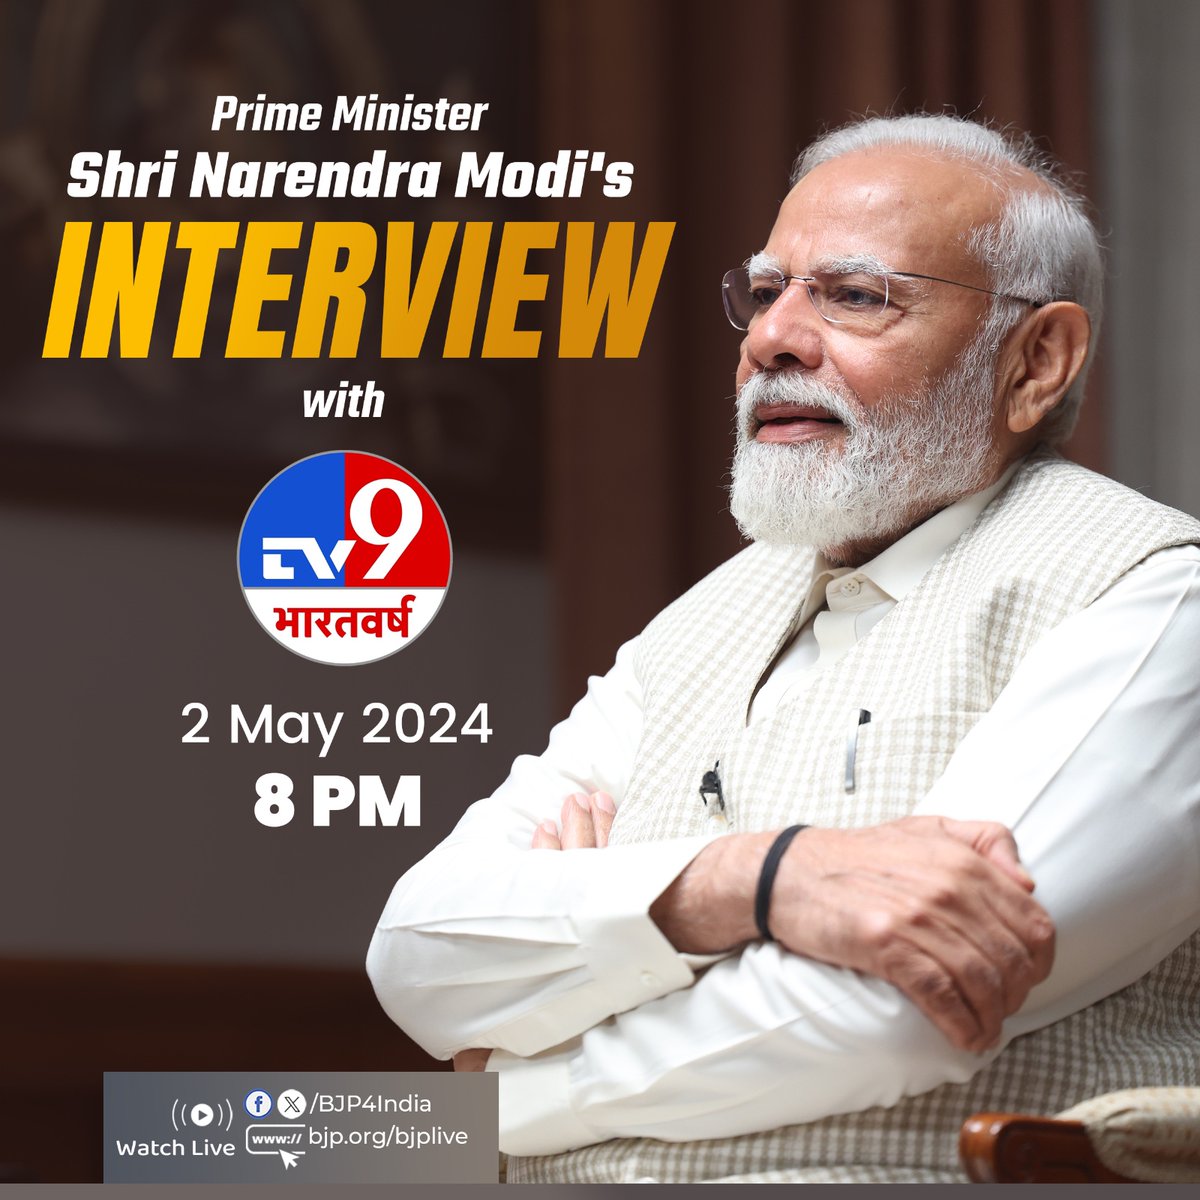 Prime Minister Shri @narendramodi's interview with TV9 Bharatvarsh will air tonight at 8 PM. Stay tuned! Watch live: 📺twitter.com/BJP4India 📺facebook.com/BJP4India 📺youtube.com/BJP4India 📺bjp.org/bjplive